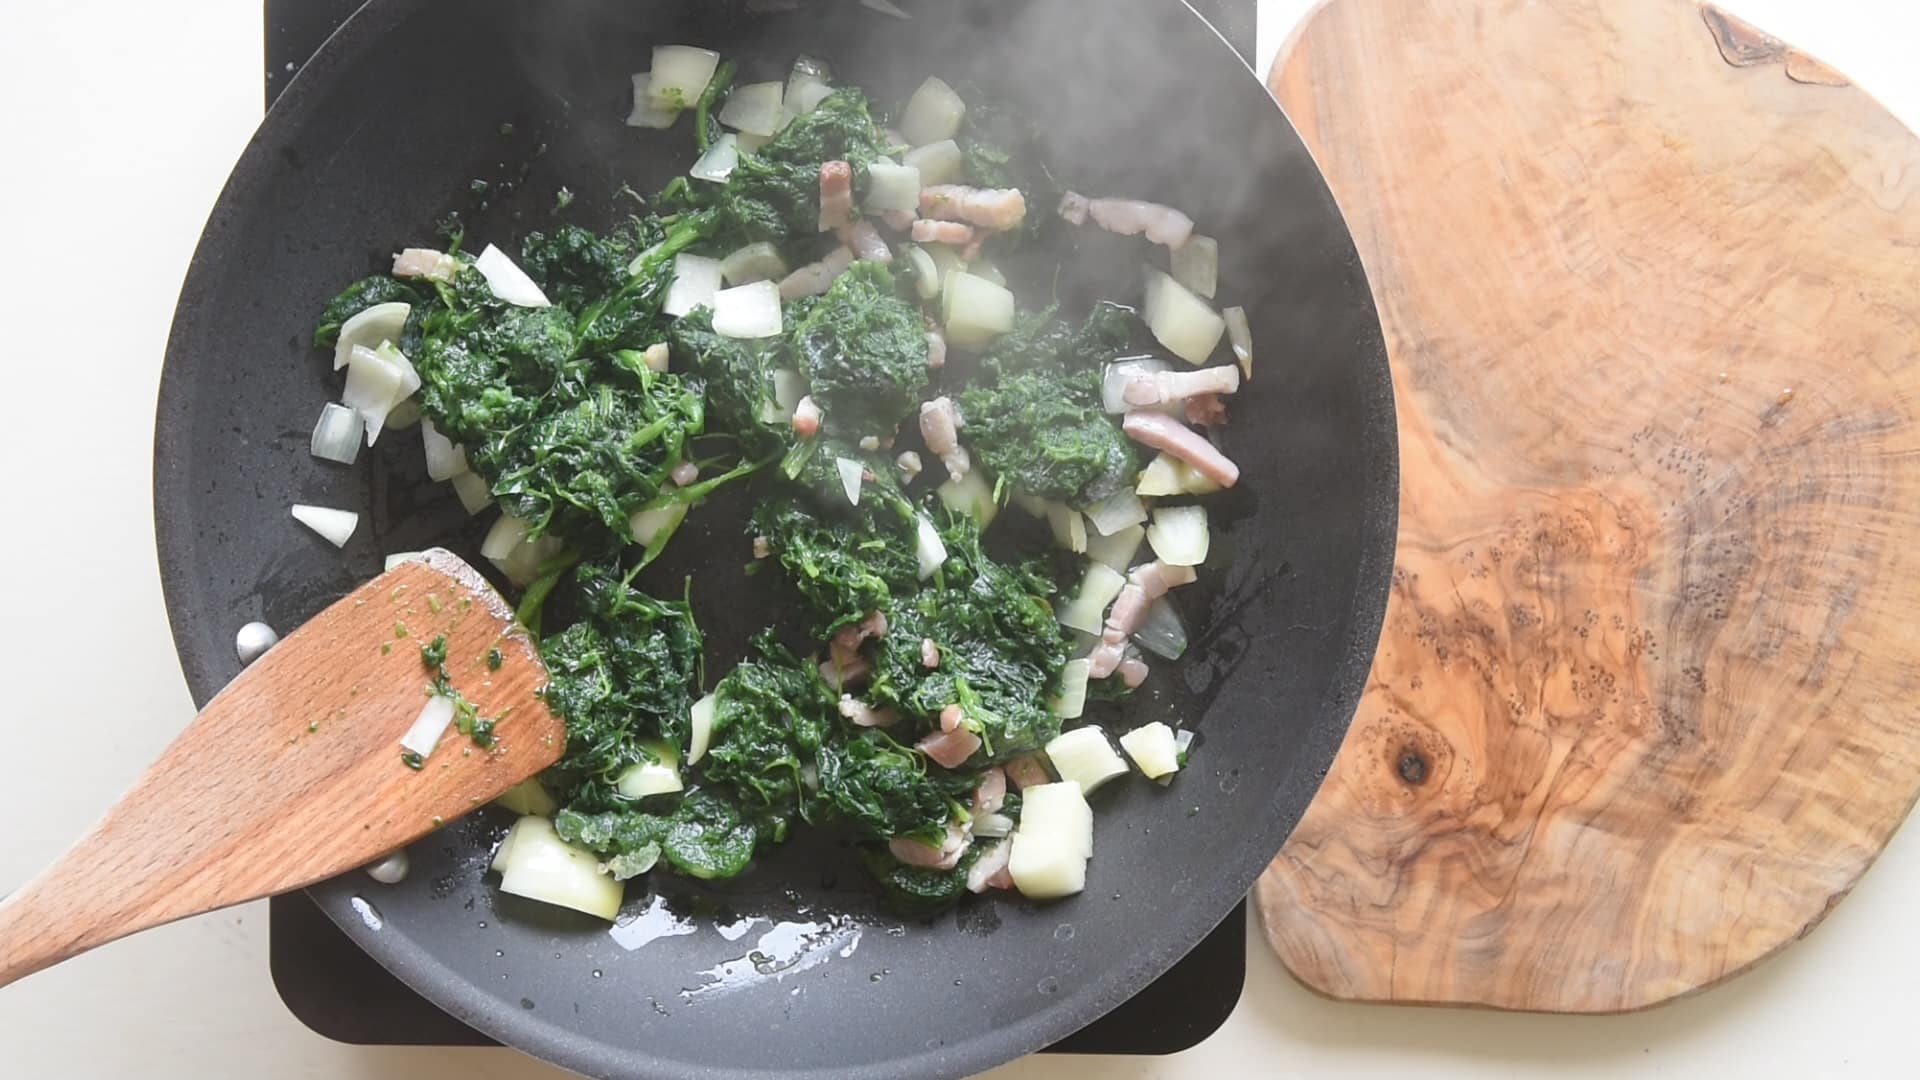 Stir fry the spinach